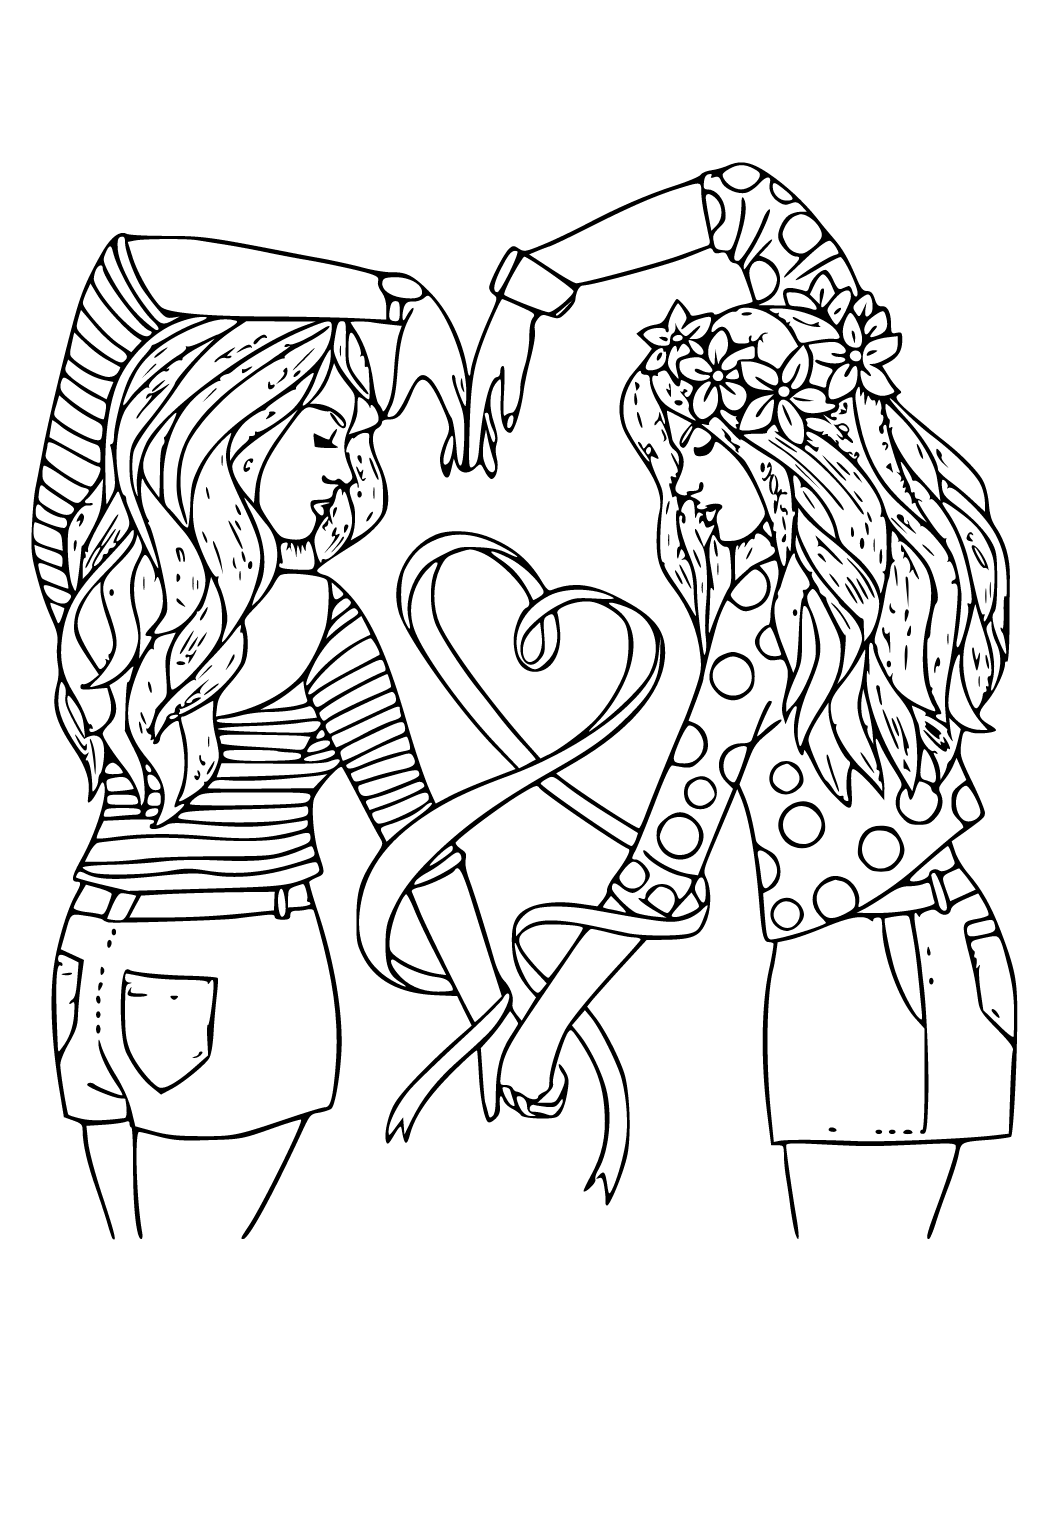 Free Printable For Teens Girlfriends Coloring Page for Adults and